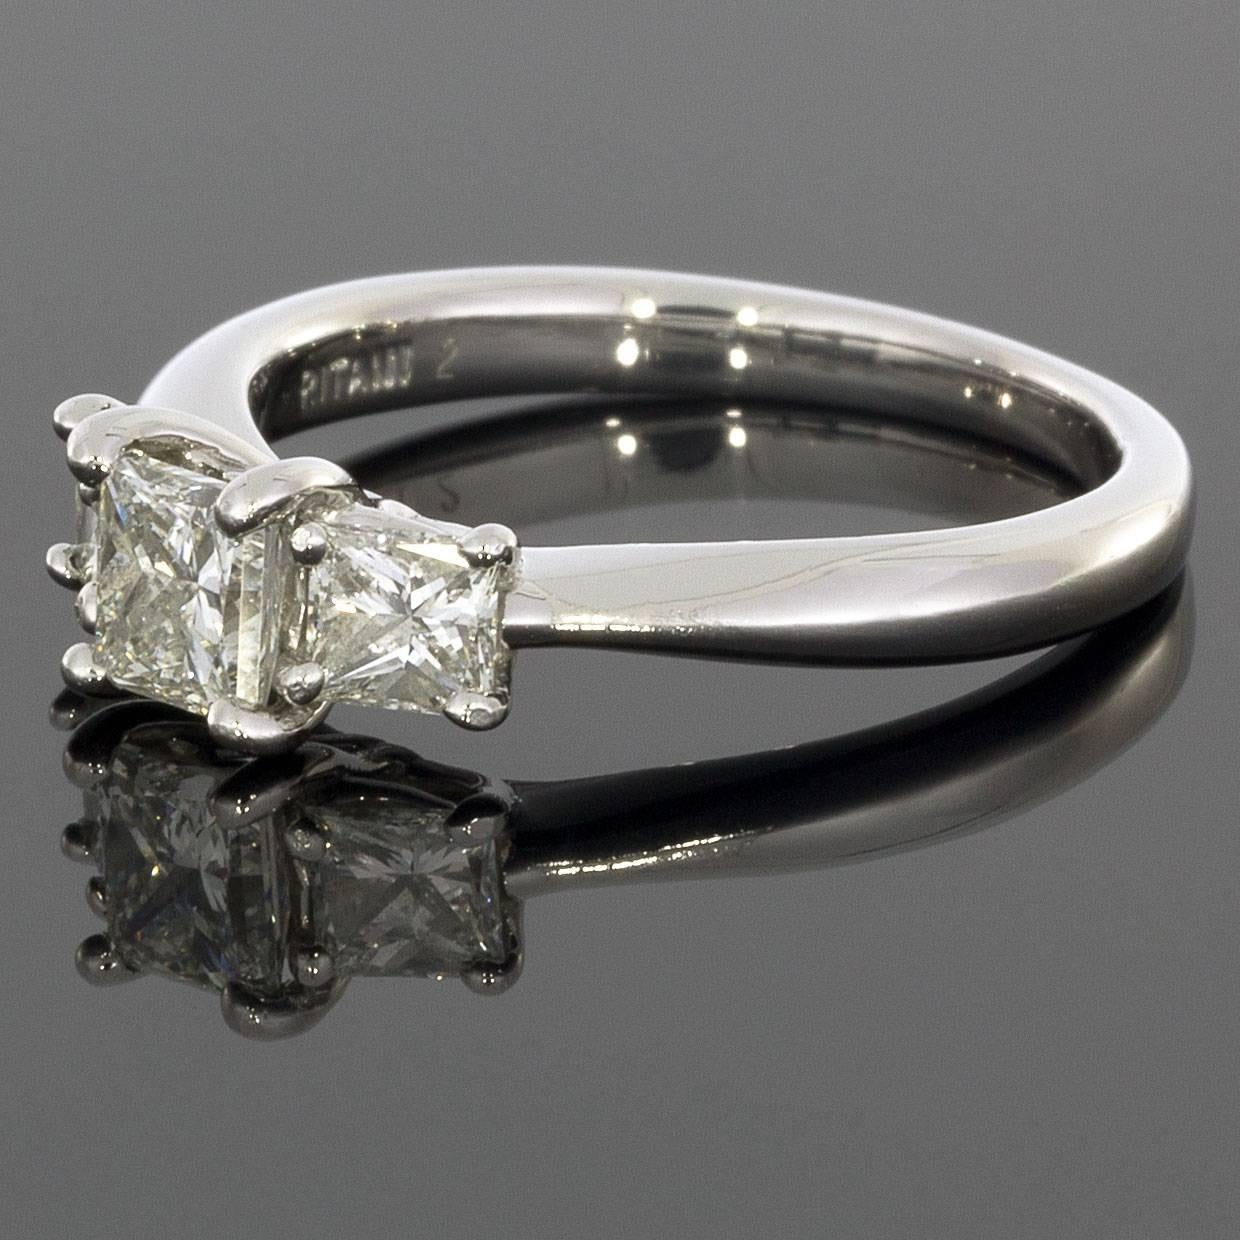 This lovely engagement ring features a beautiful three stone design. The three diamonds are princess cut gemstones that grade as I/SI1 in quality. The engagement ring has a combined total weight of .75 carat. The ring is comprised of platinum & is a